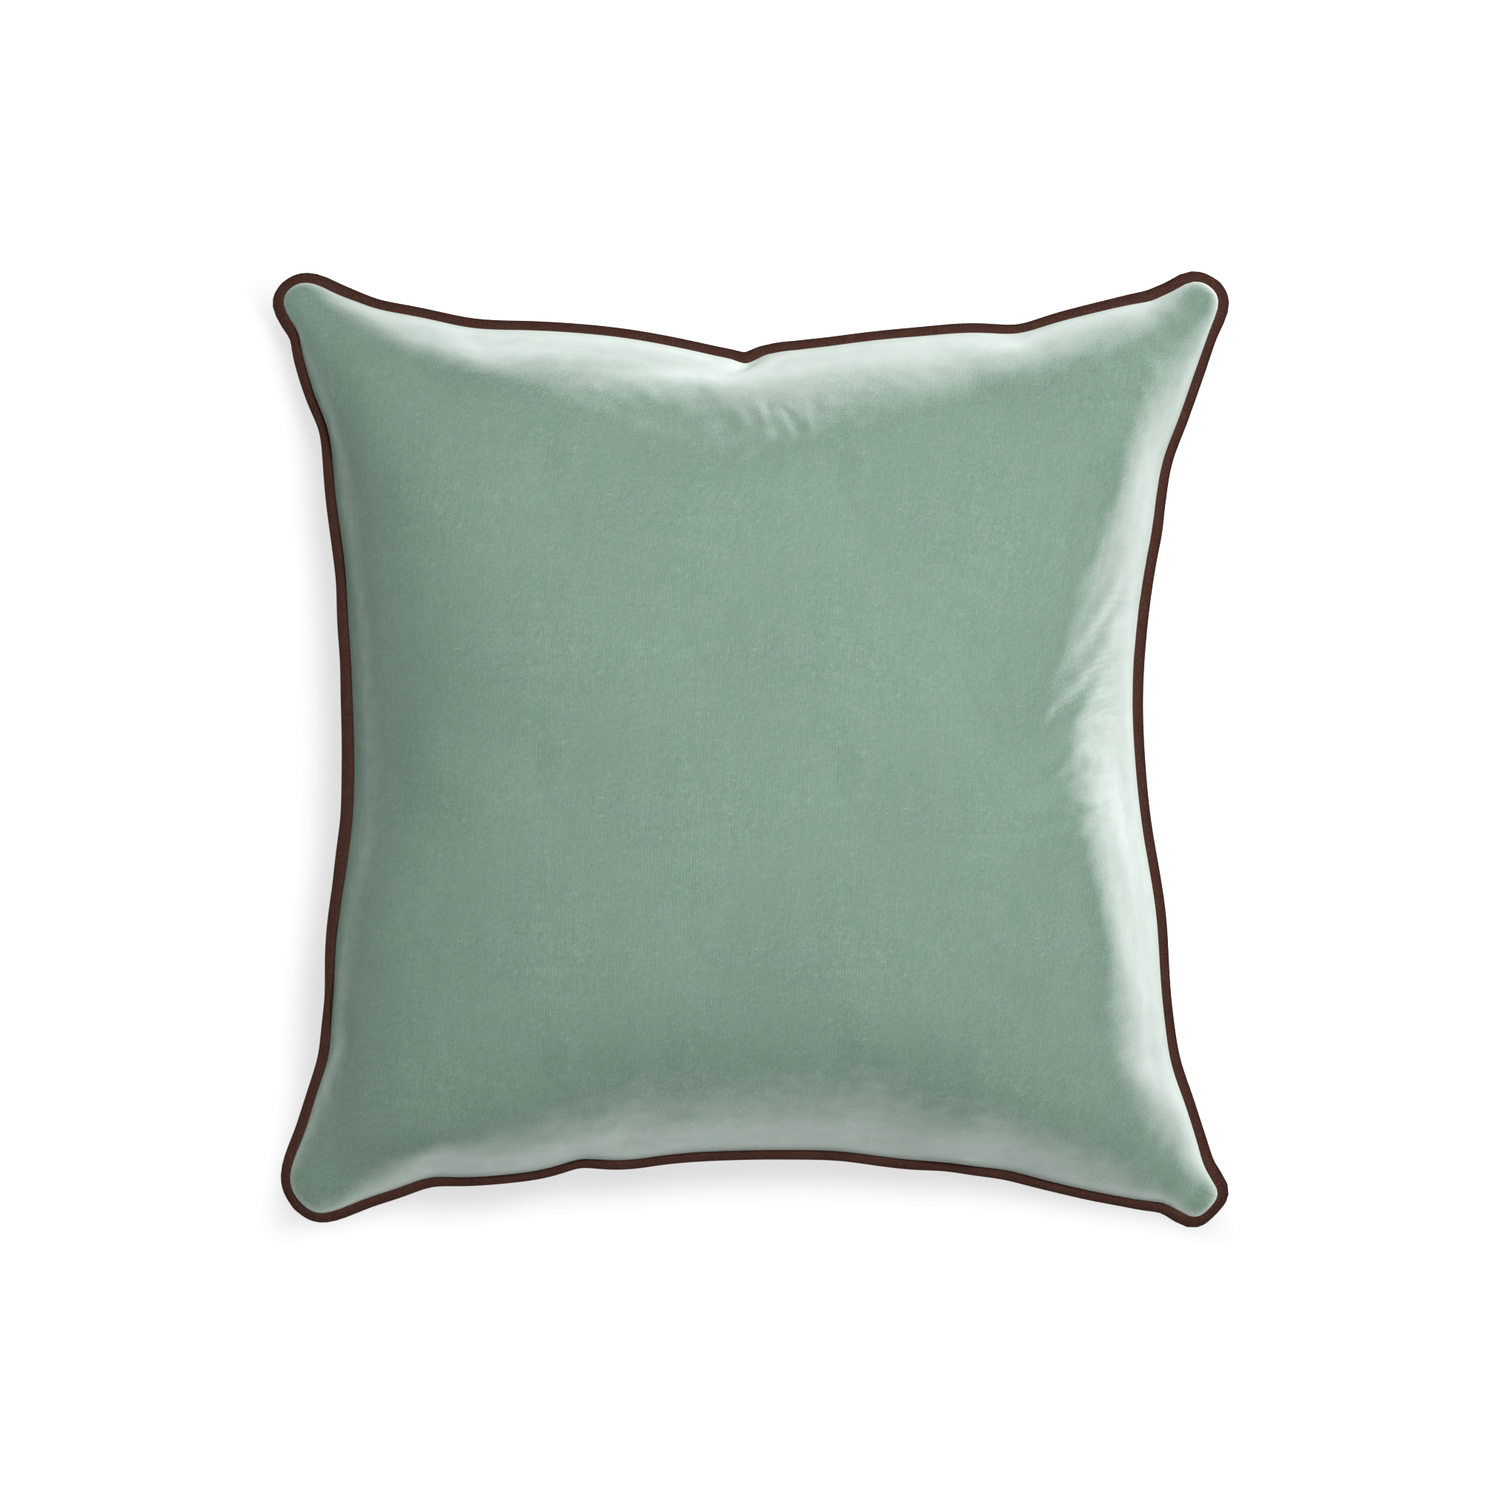 square blue green velvet pillow with brown piping